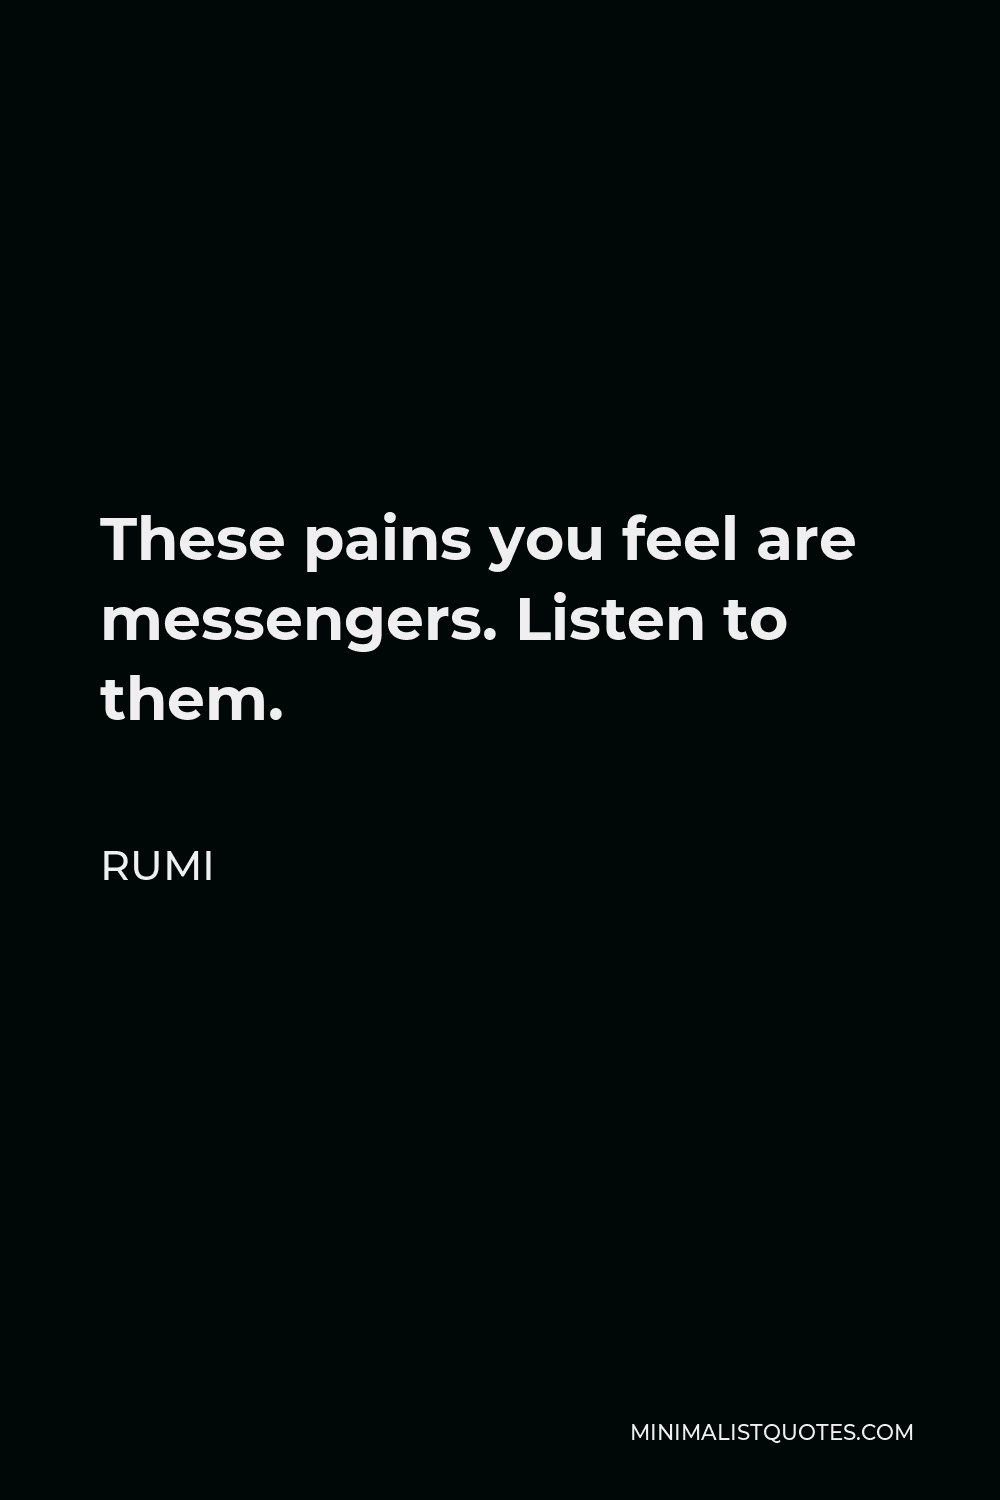 Rumi Quote - These pains you feel are messengers. Listen to them.